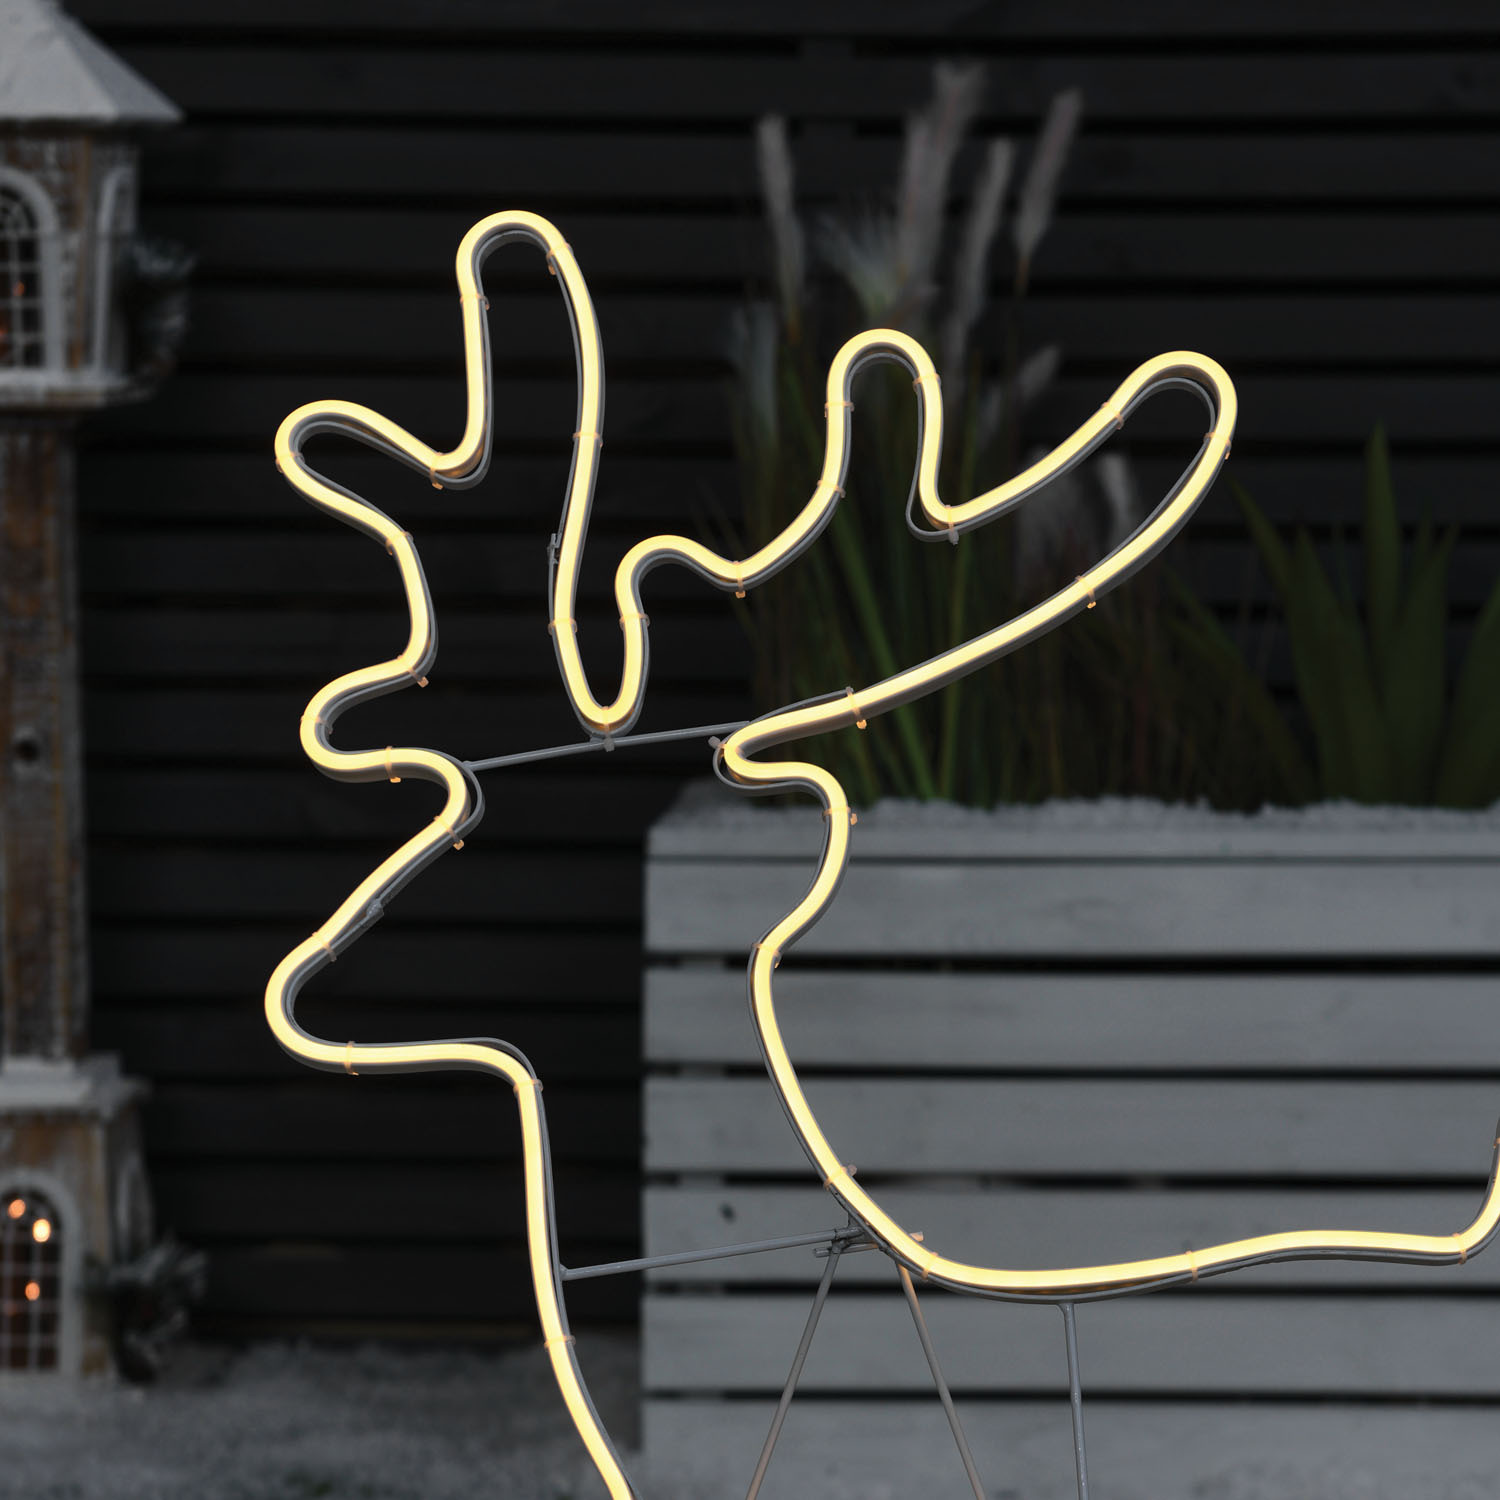 Standing LED Reindeer Rope Light - Warm White Image 2